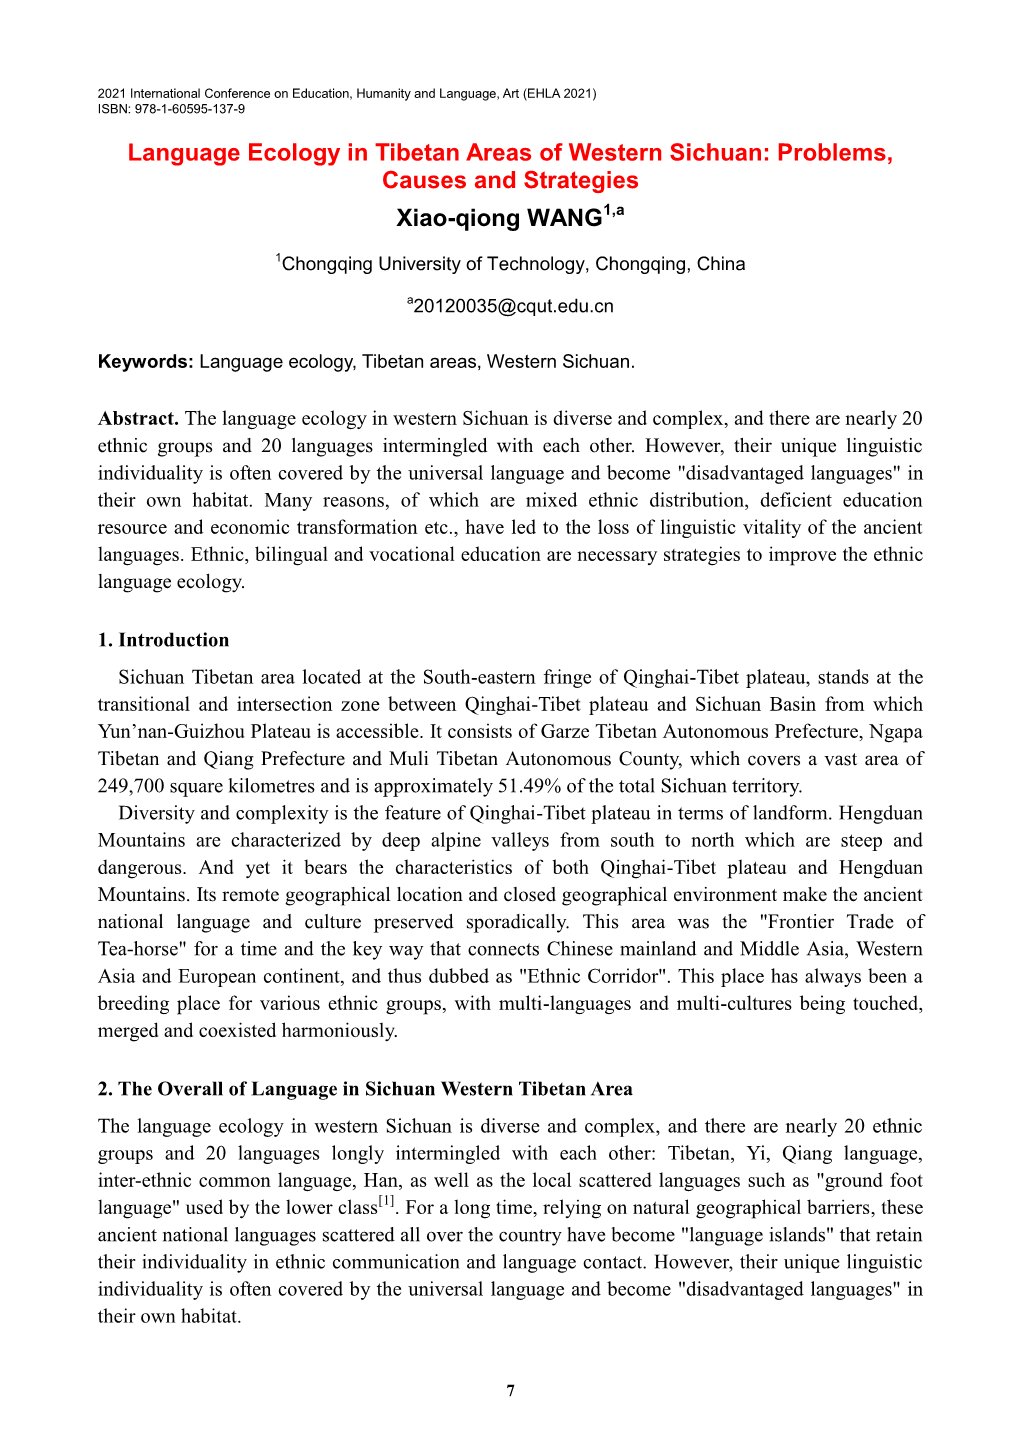 Language Ecology in Tibetan Areas of Western Sichuan: Problems, Causes and Strategies Xiao-Qiong WANG1,A